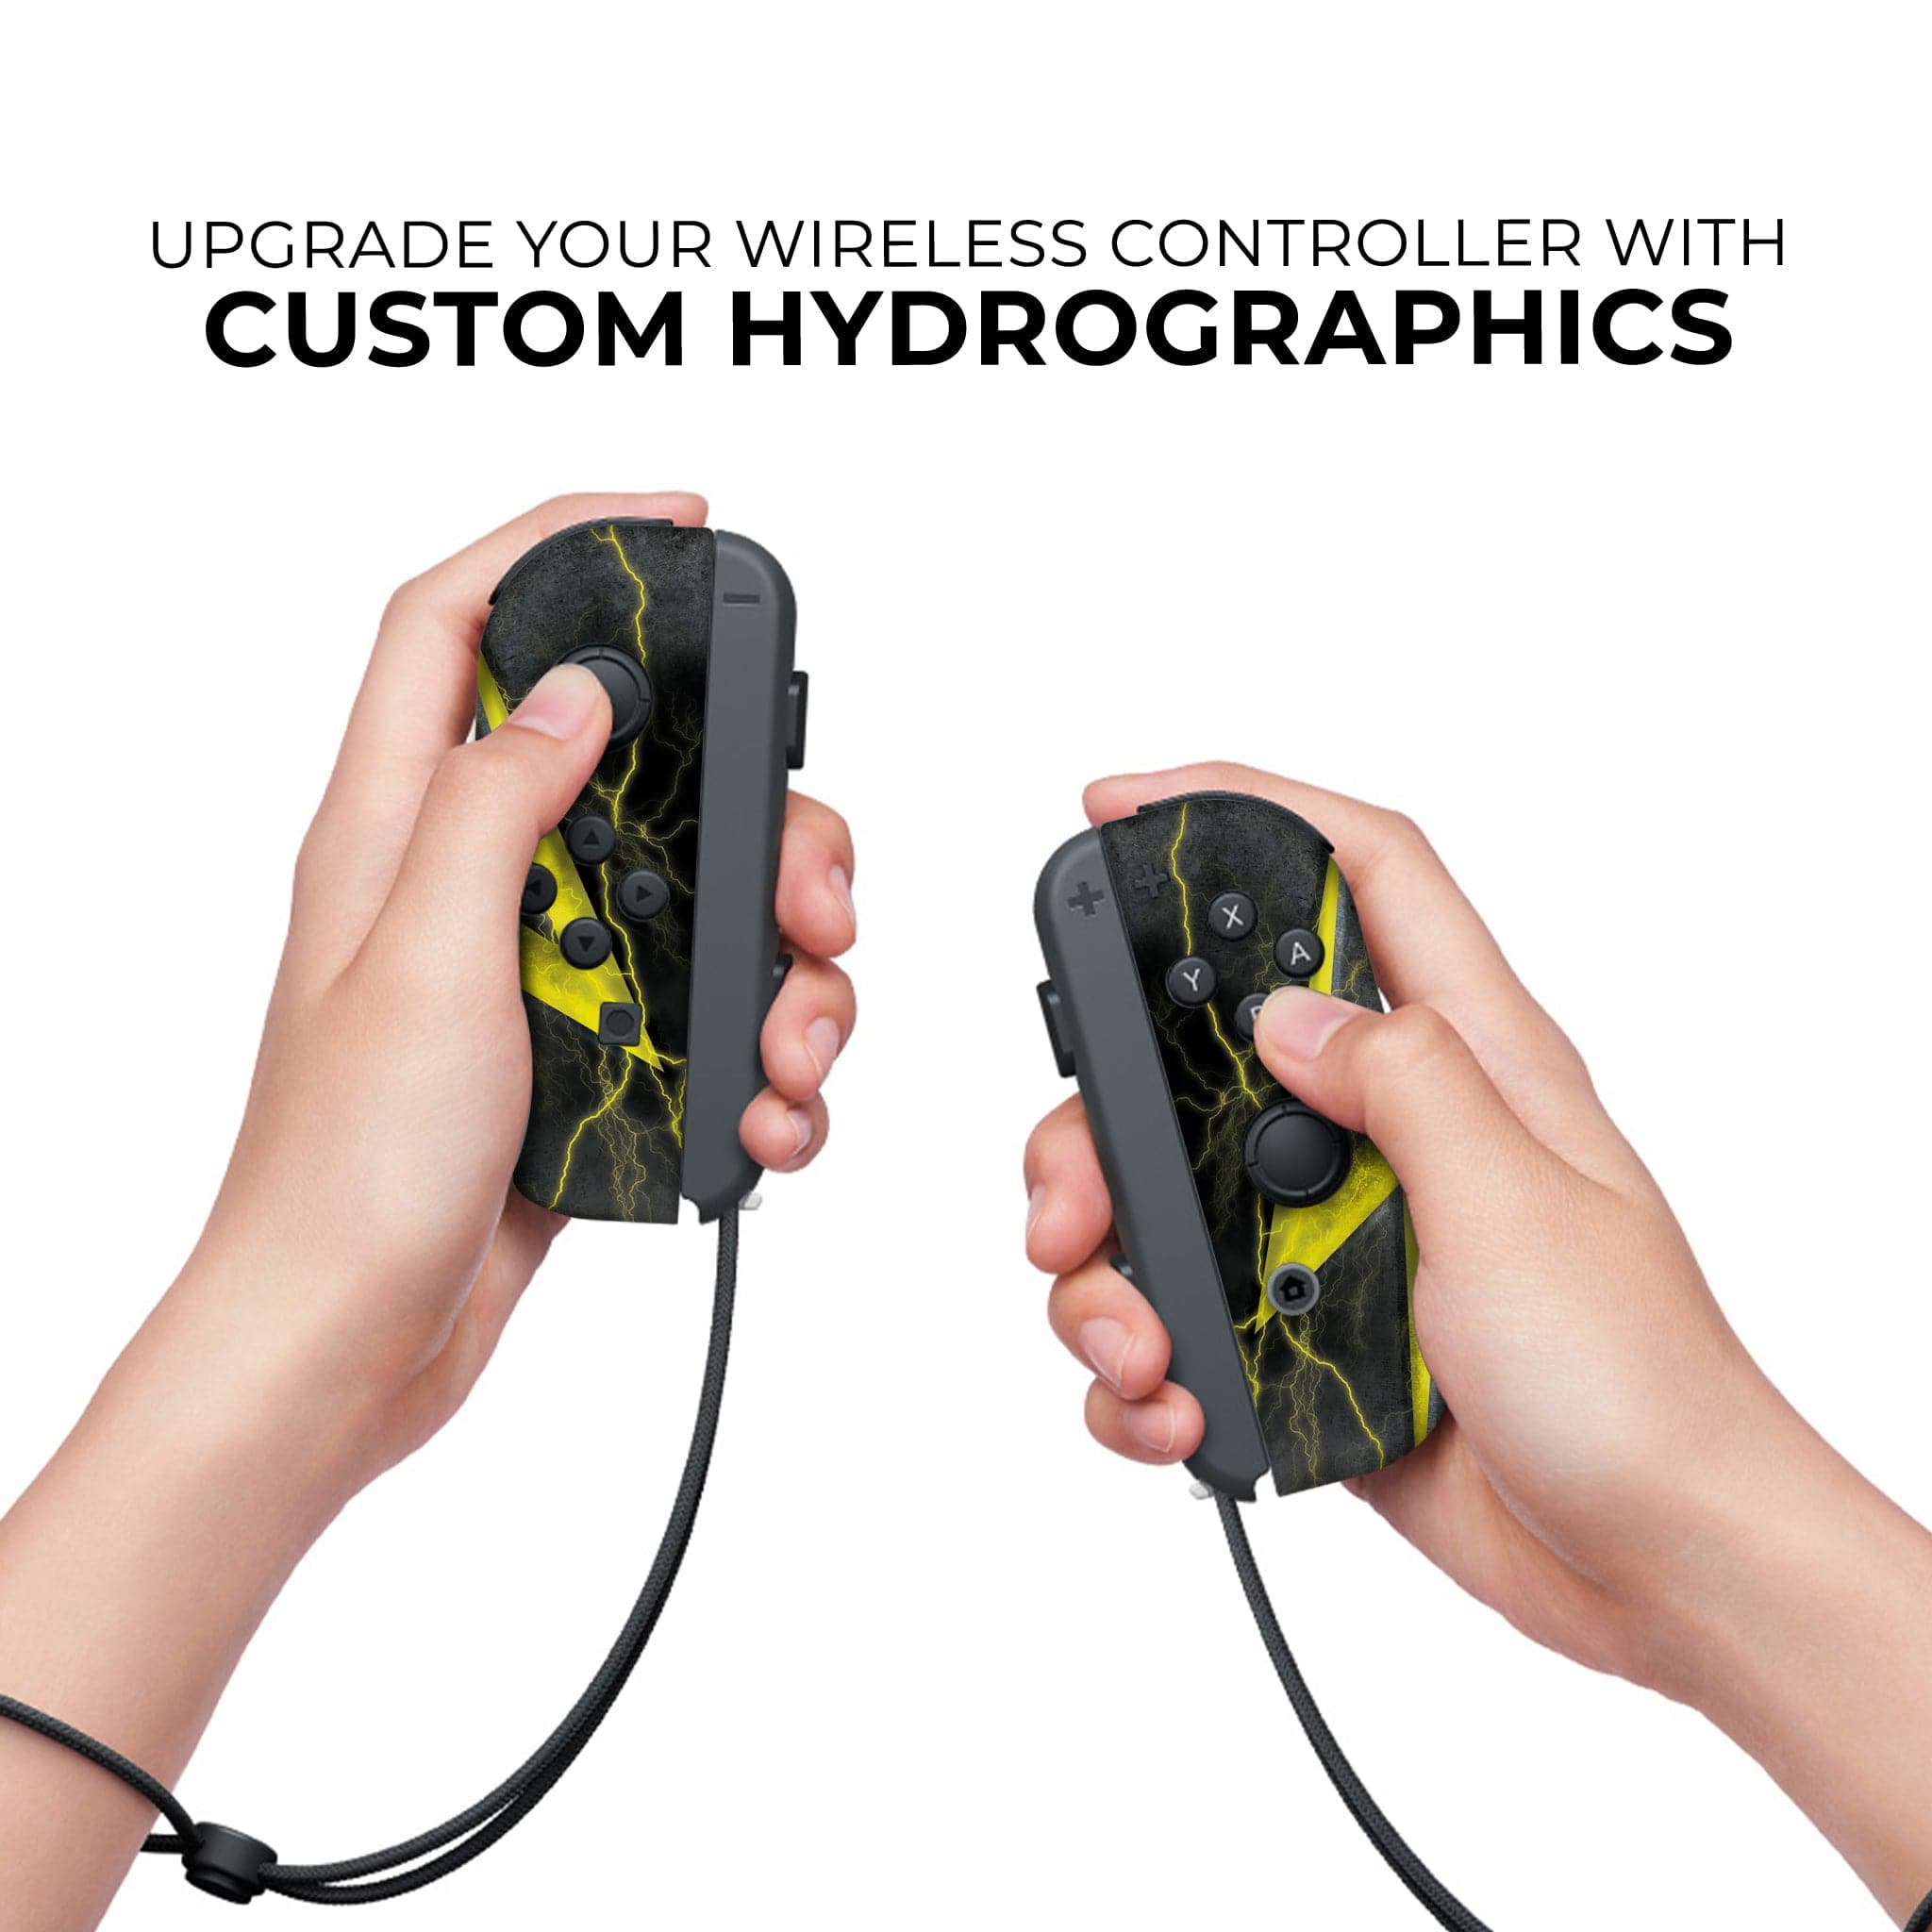 Pokemon Legends Arceus Inspired Nintendo Switch Joy-Con Left and Right  Switch Controllers by Nintendo